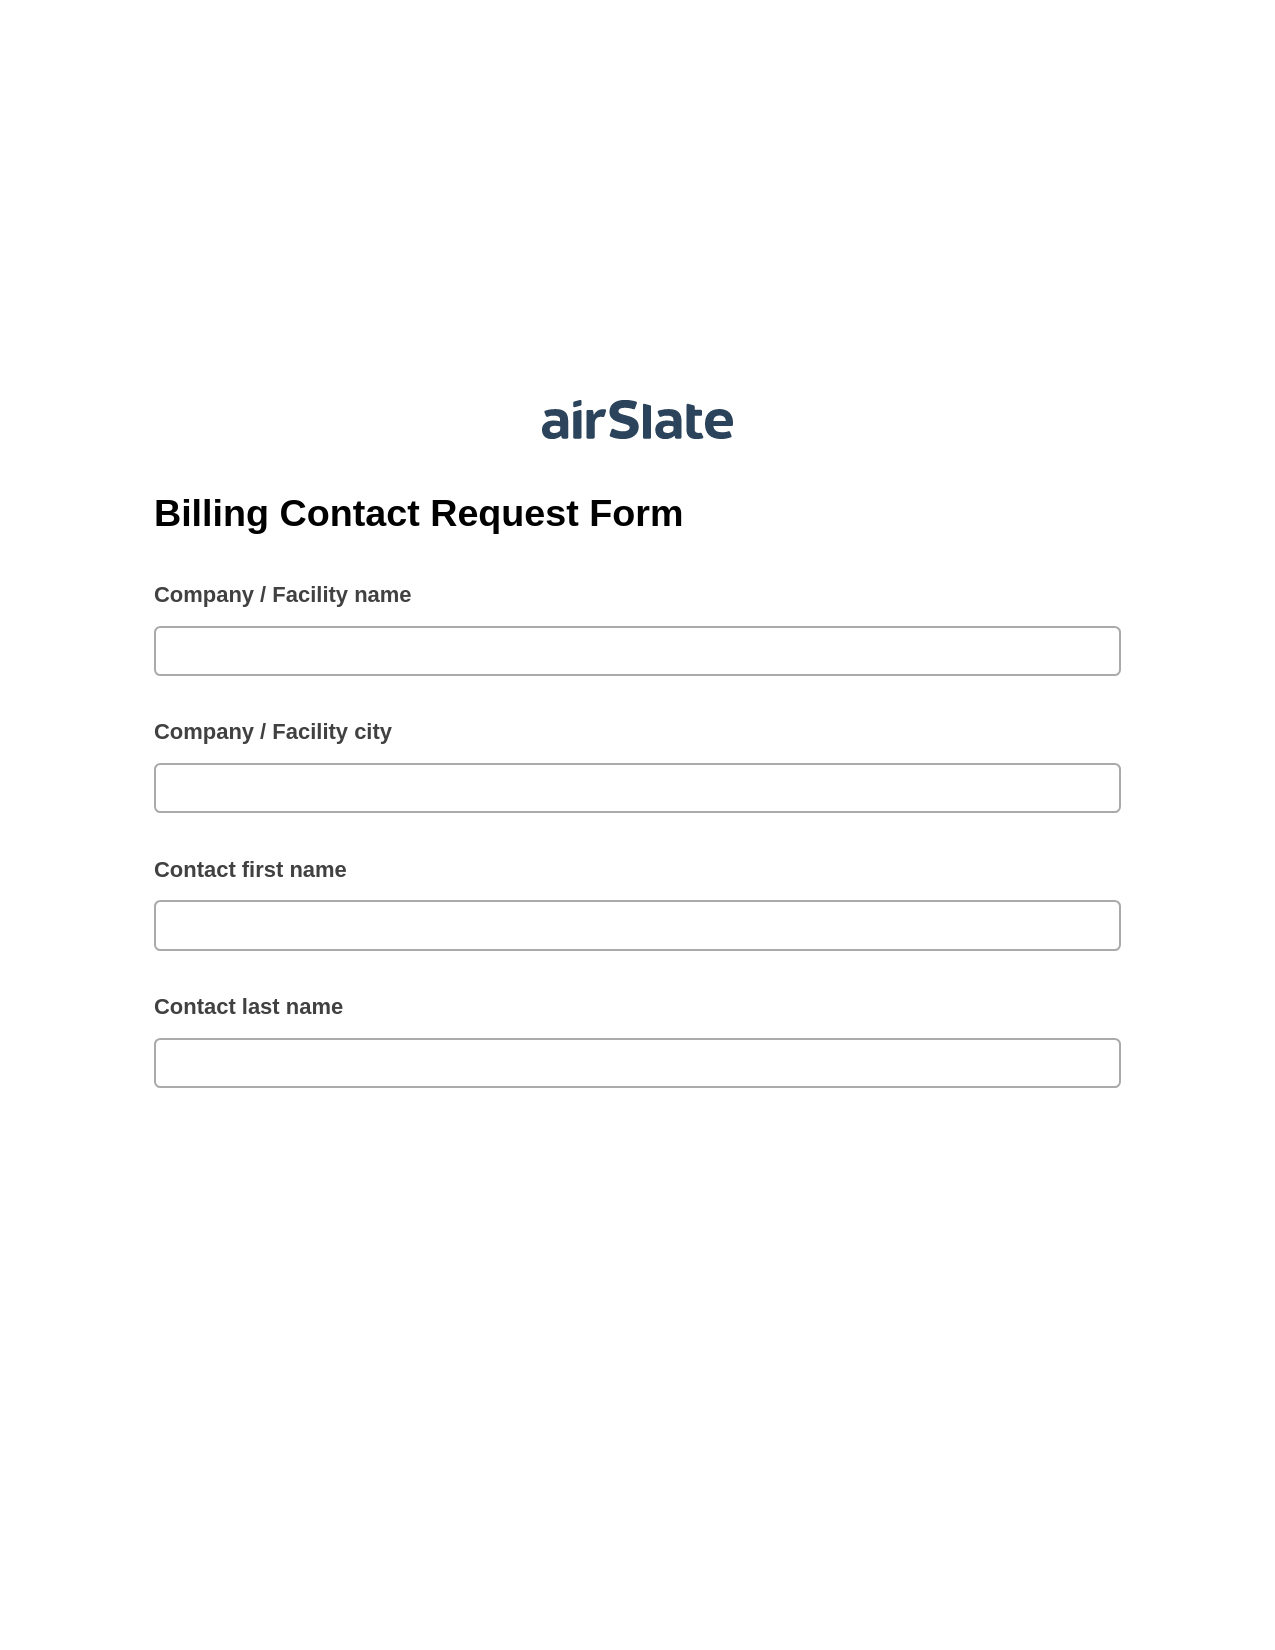 Multirole Billing Contact Request Form Pre-fill Dropdowns from MySQL Bot, Audit Trail Bot, Email Notification Postfinish Bot